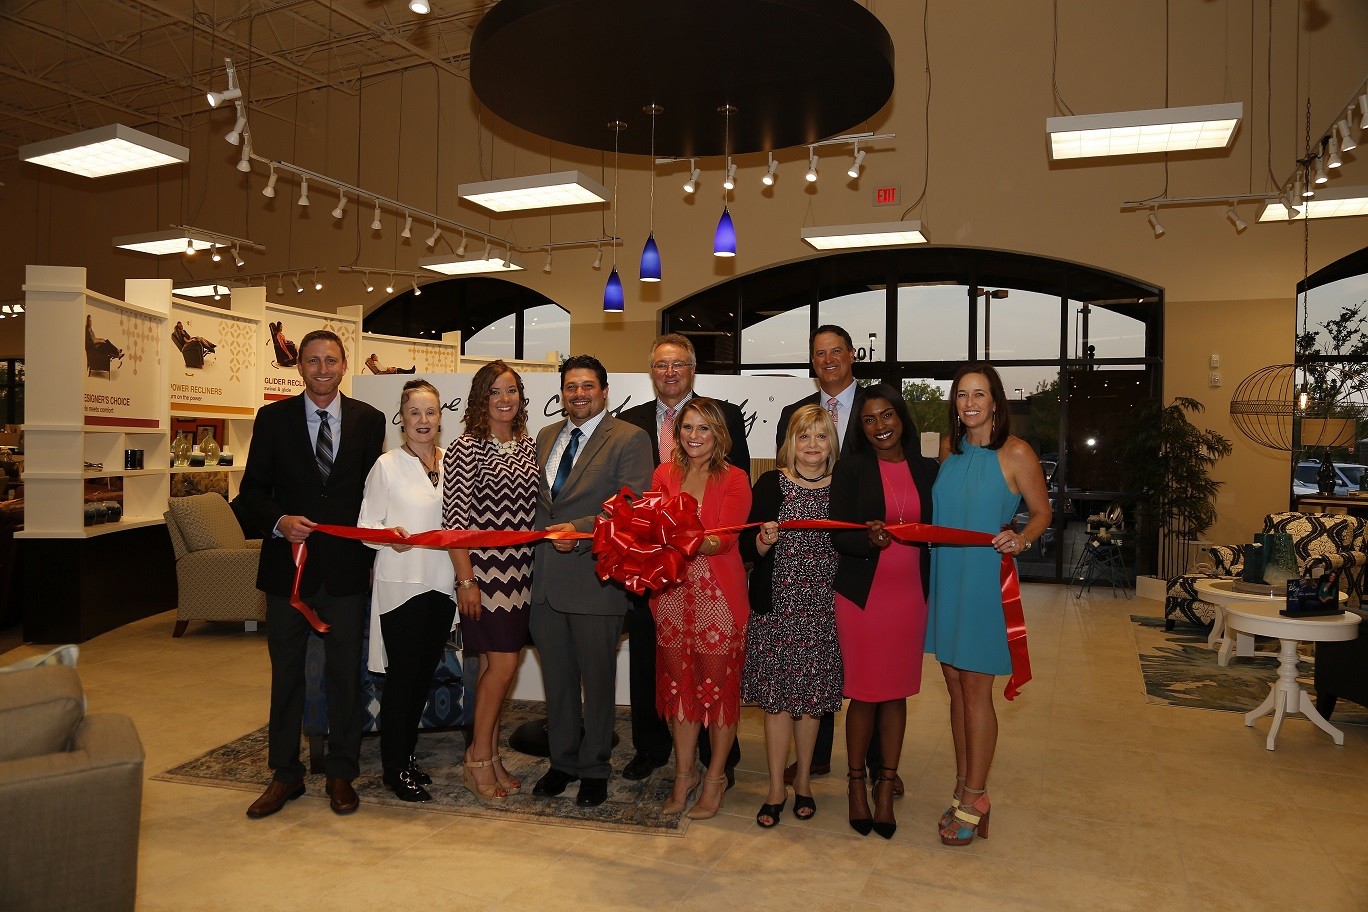 The team at La-Z-Boy Furniture Galleries of Jacksonville, which donated 26 sleeper sofas and living room furniture to Ronald McDonald House Charities of Jacksonville, recently celebrated the grand opening of its new store at the St. Johns Town Center.